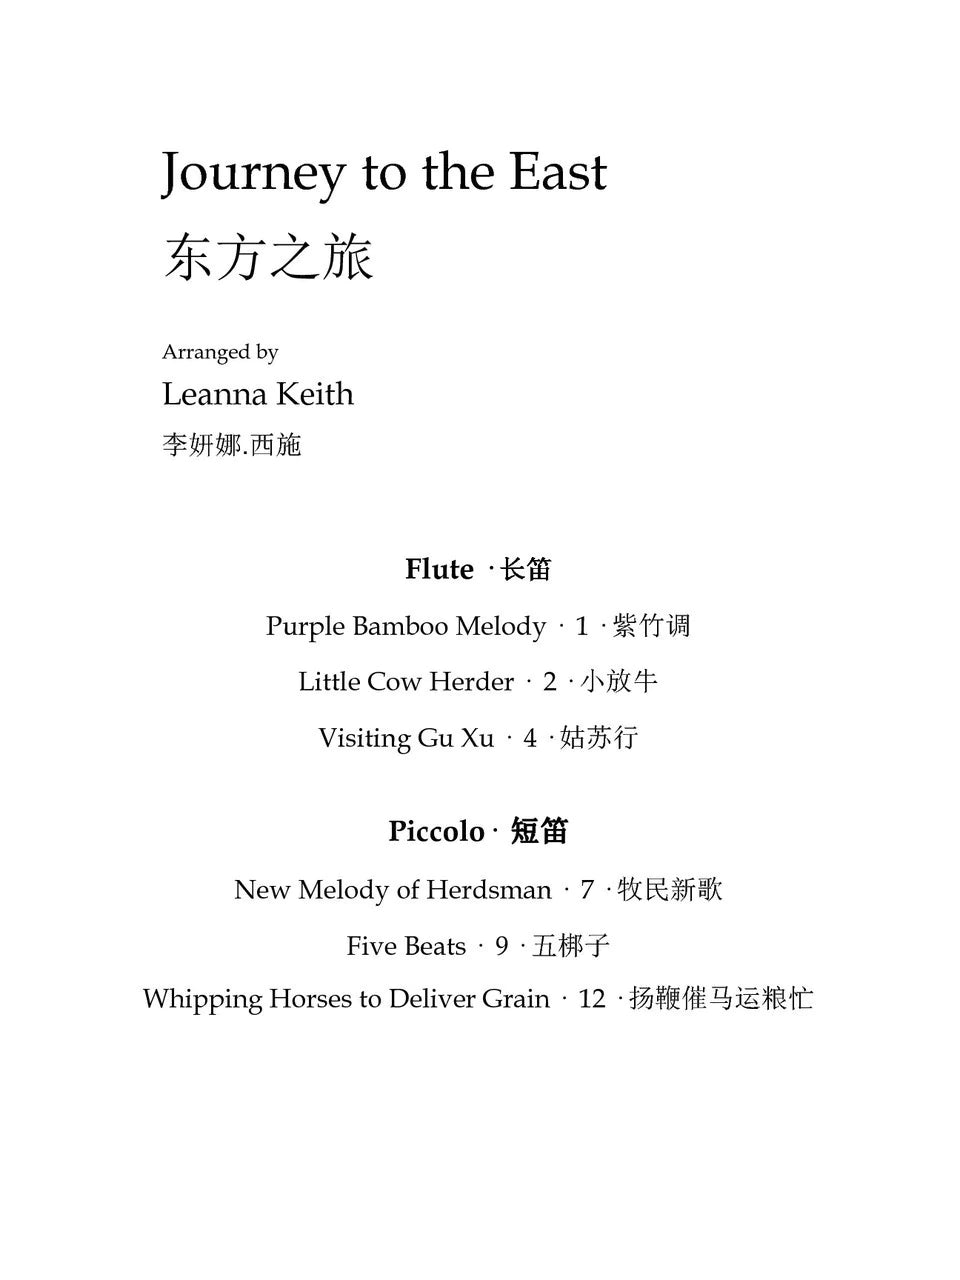 Keith - Journey to the East , Flute and piccolo solos